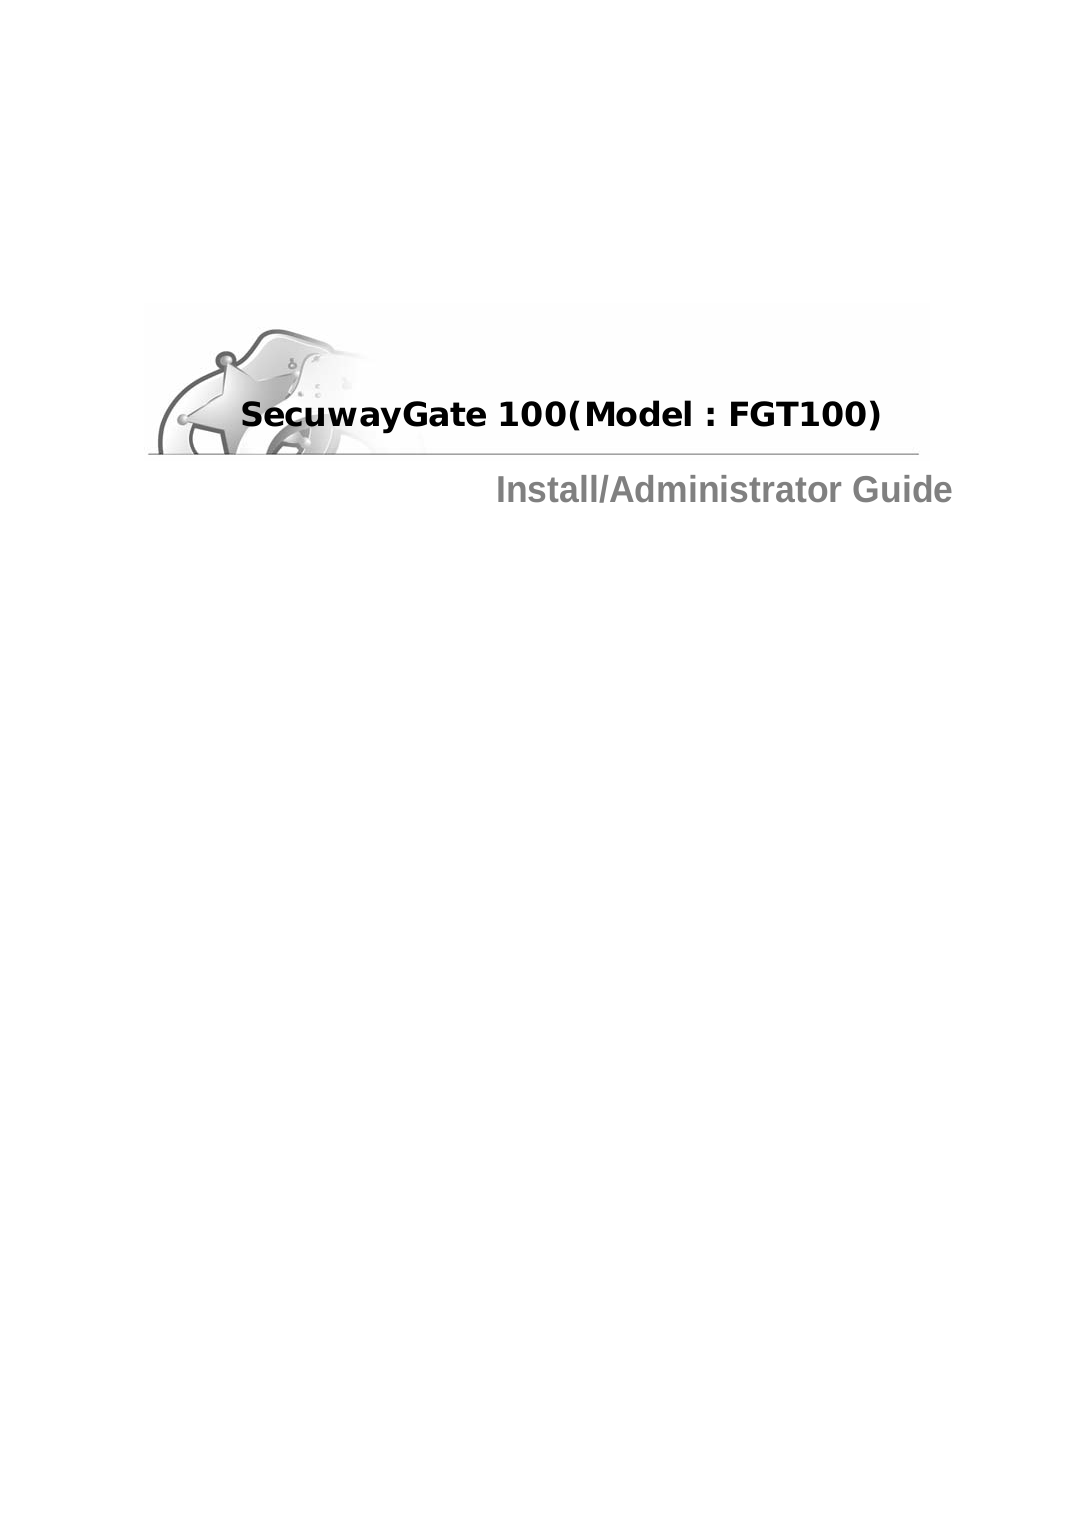   SecuwayGate 100(Model : FGT100)                                Install/Administrator Guide  